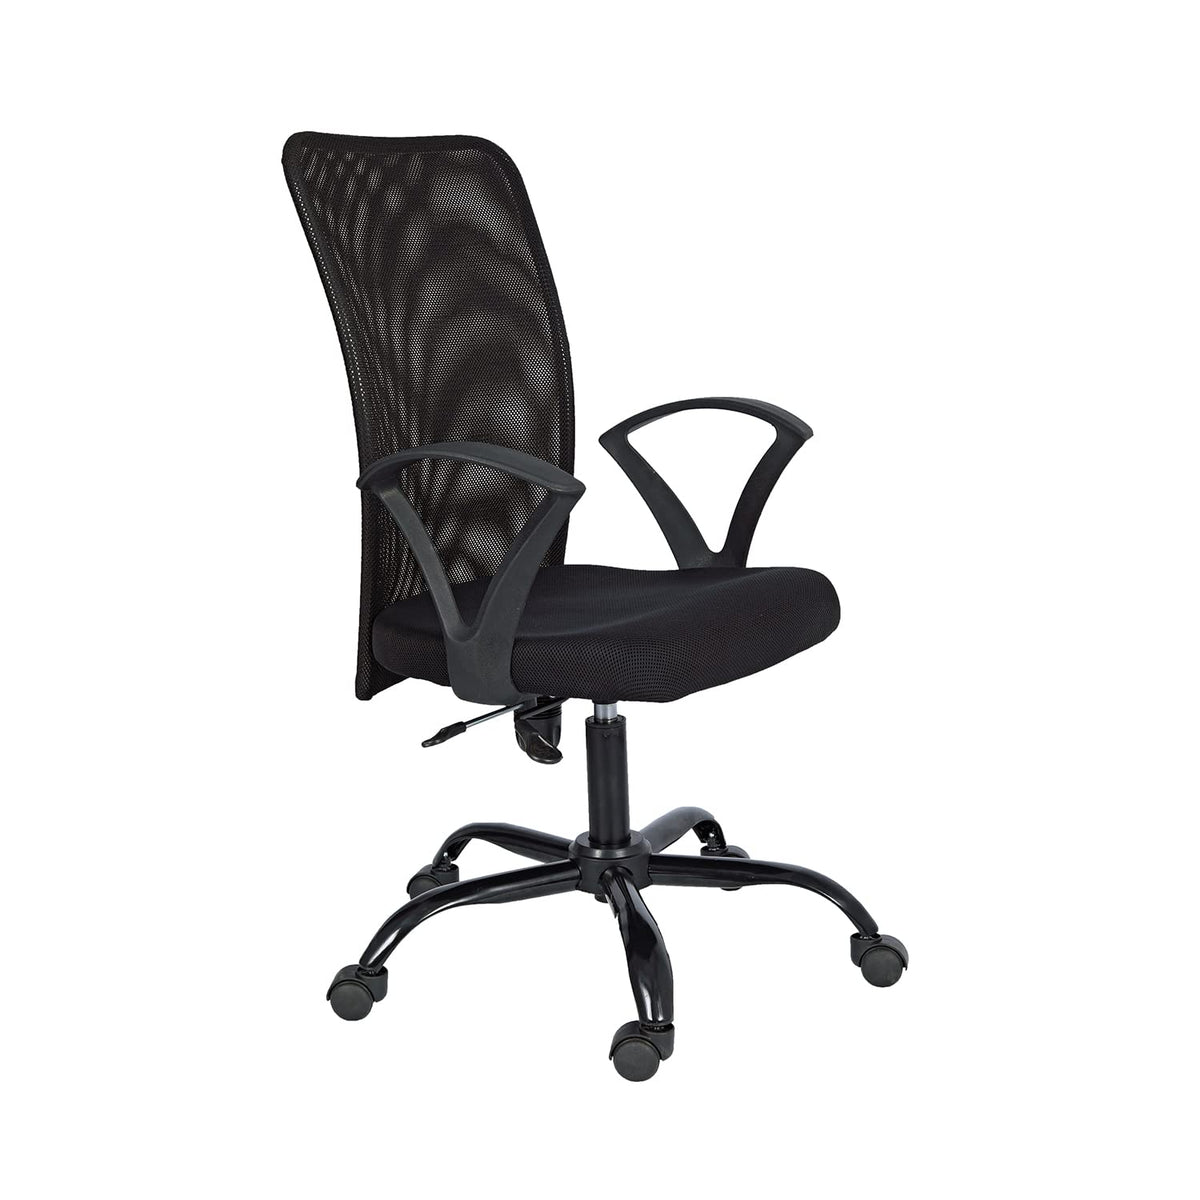 SmileSellers Mesh Mid-Back Ergonomic Desk Office Chair with Tilting Mechanism, Comfortable Seat, and Revolving Heavy Duty Metal Base | Ideal for Work from Home & Study